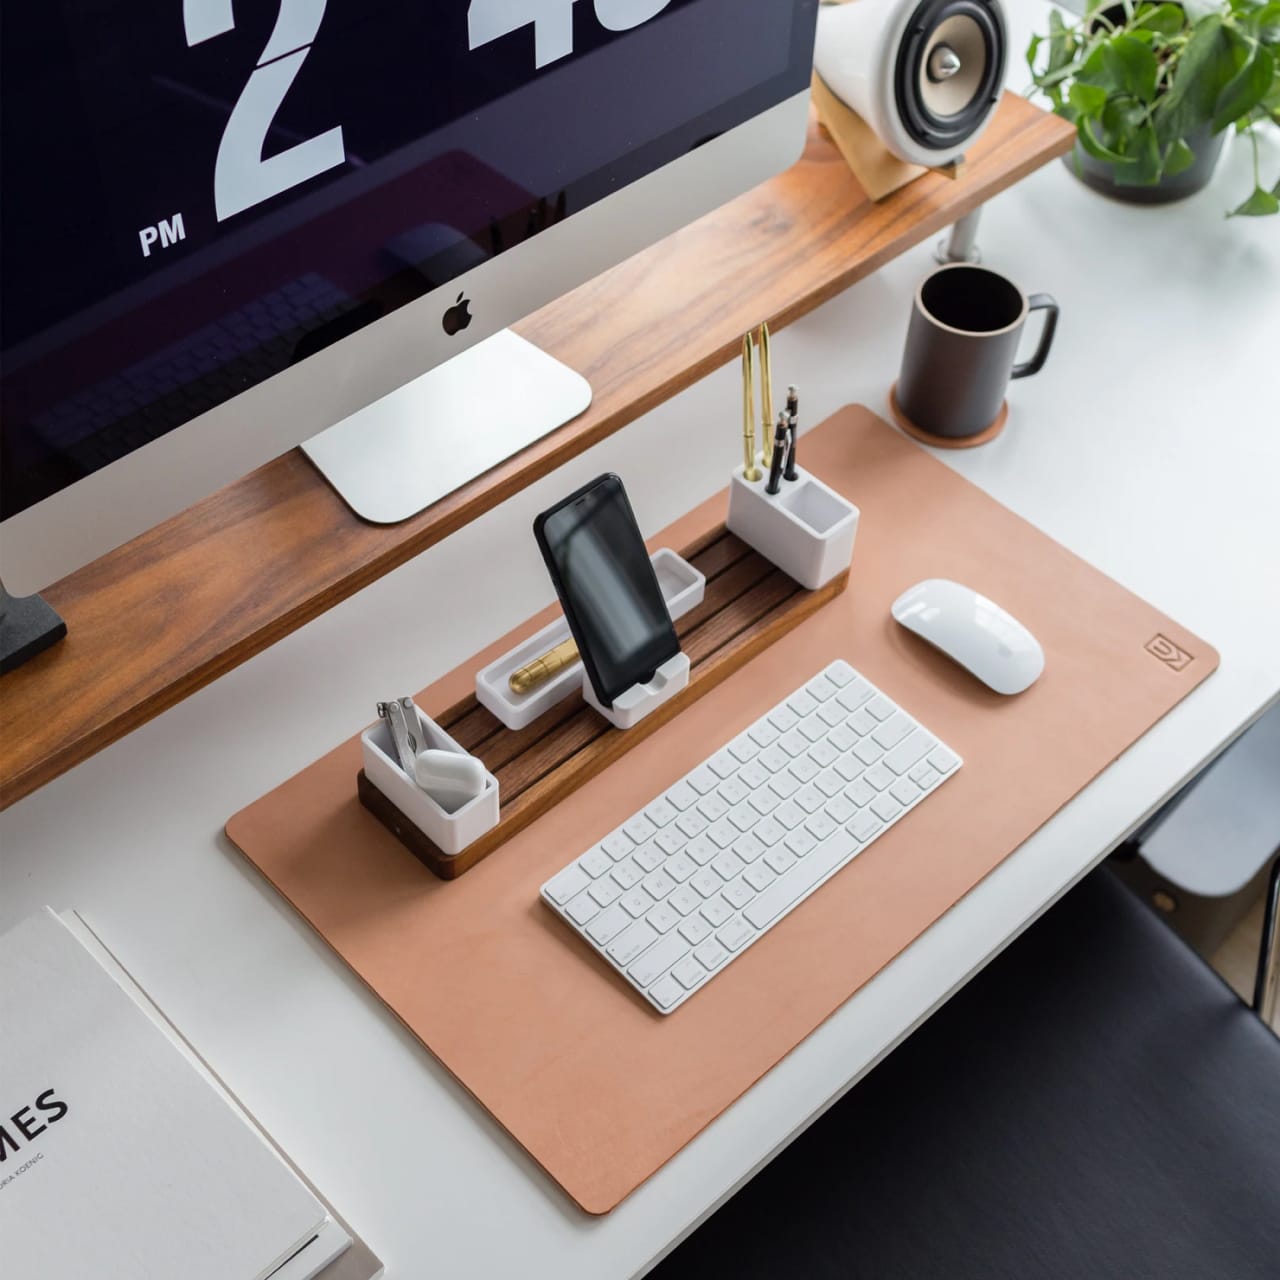 Desk with leather desk pad, walnut desk organizer, wireless keyboard and mouse, and porcelain mug.